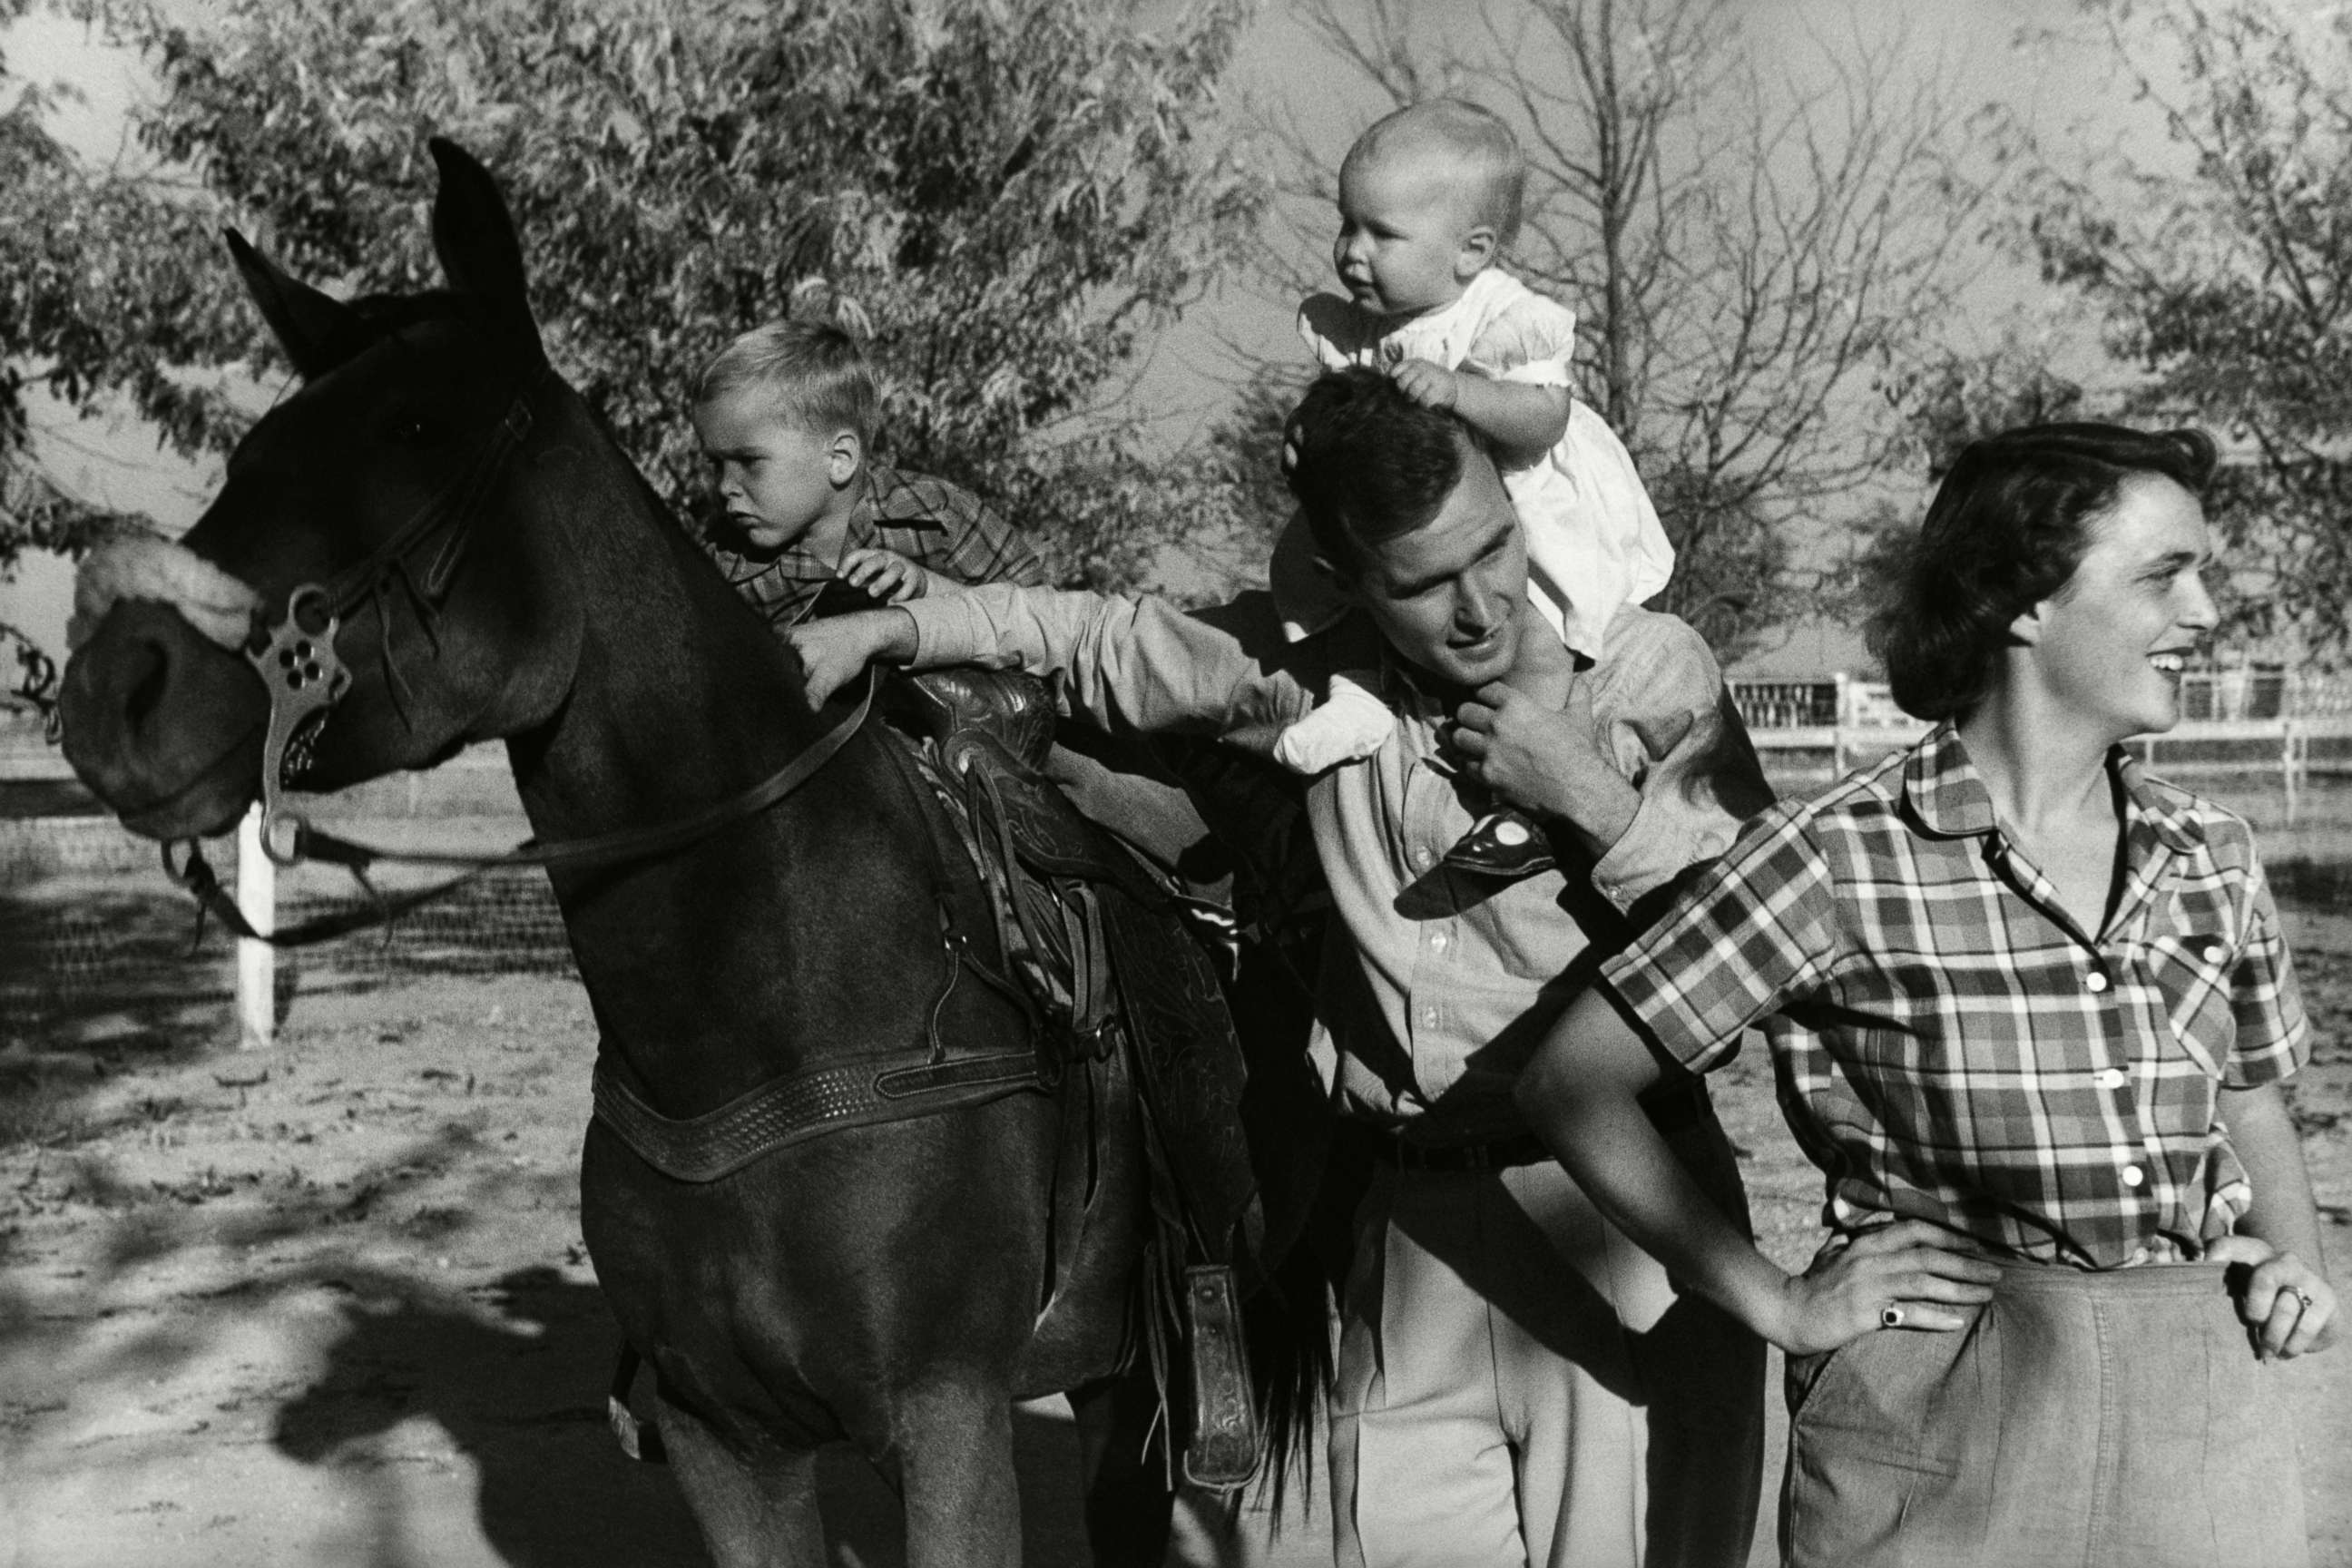 PHOTO: George H. W. Bush with his wife, Barbara, with  their children Pauline (Robin) and George W. on a horse in the yard of their Midlands, Texas ranch, Dec. 11, 1950.